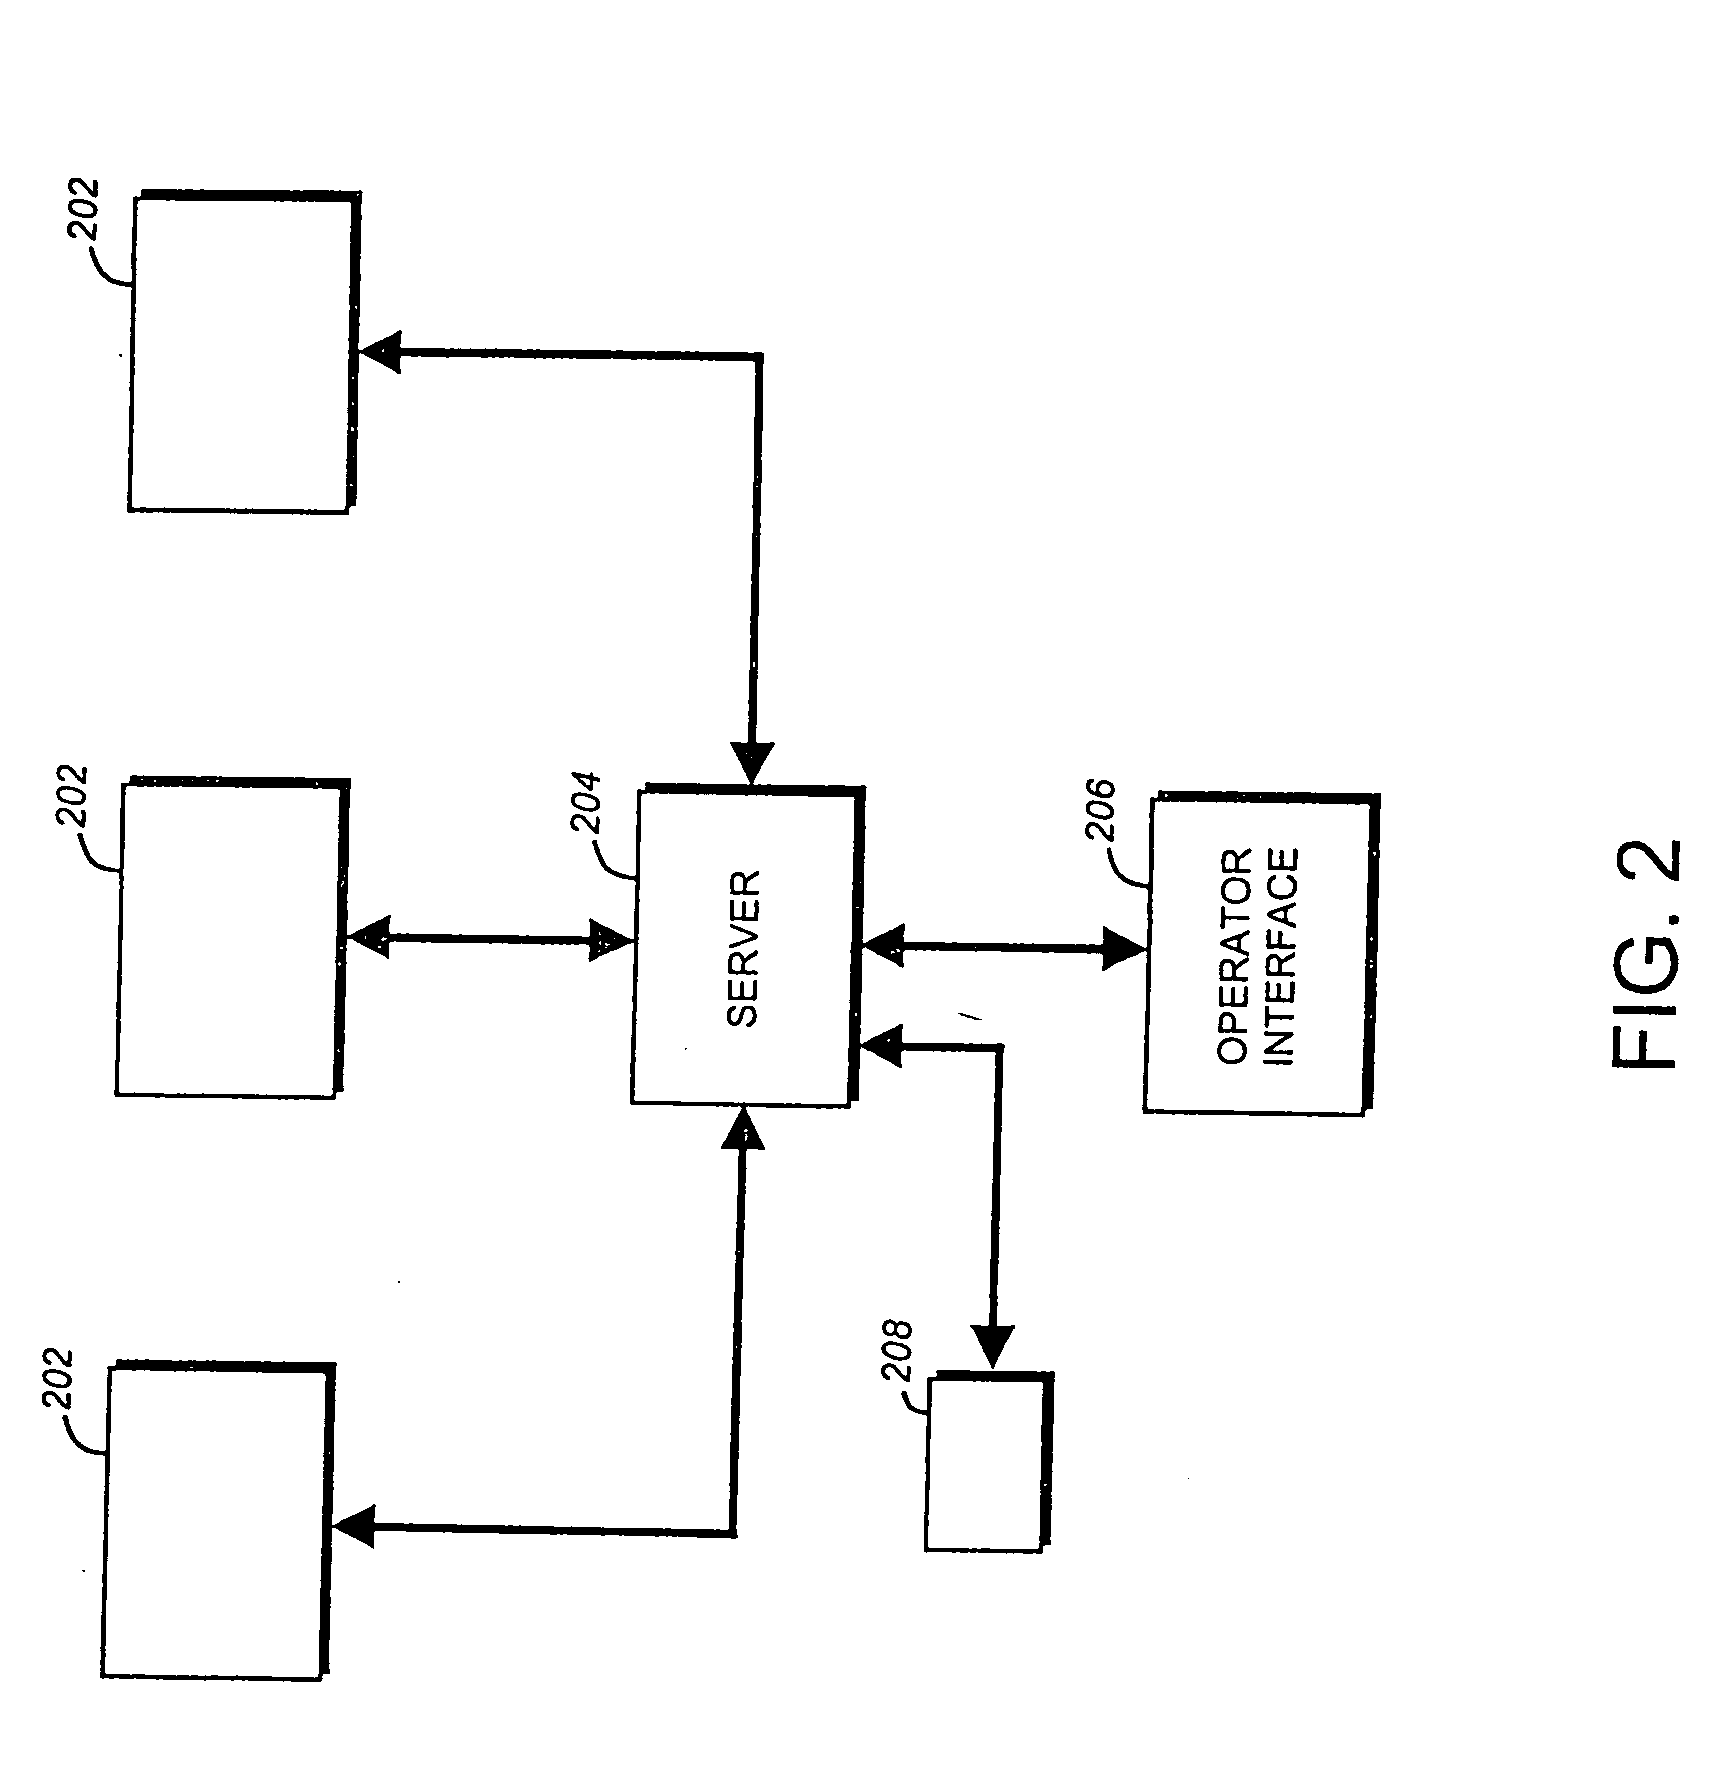 Remote baggage screening system, software and method